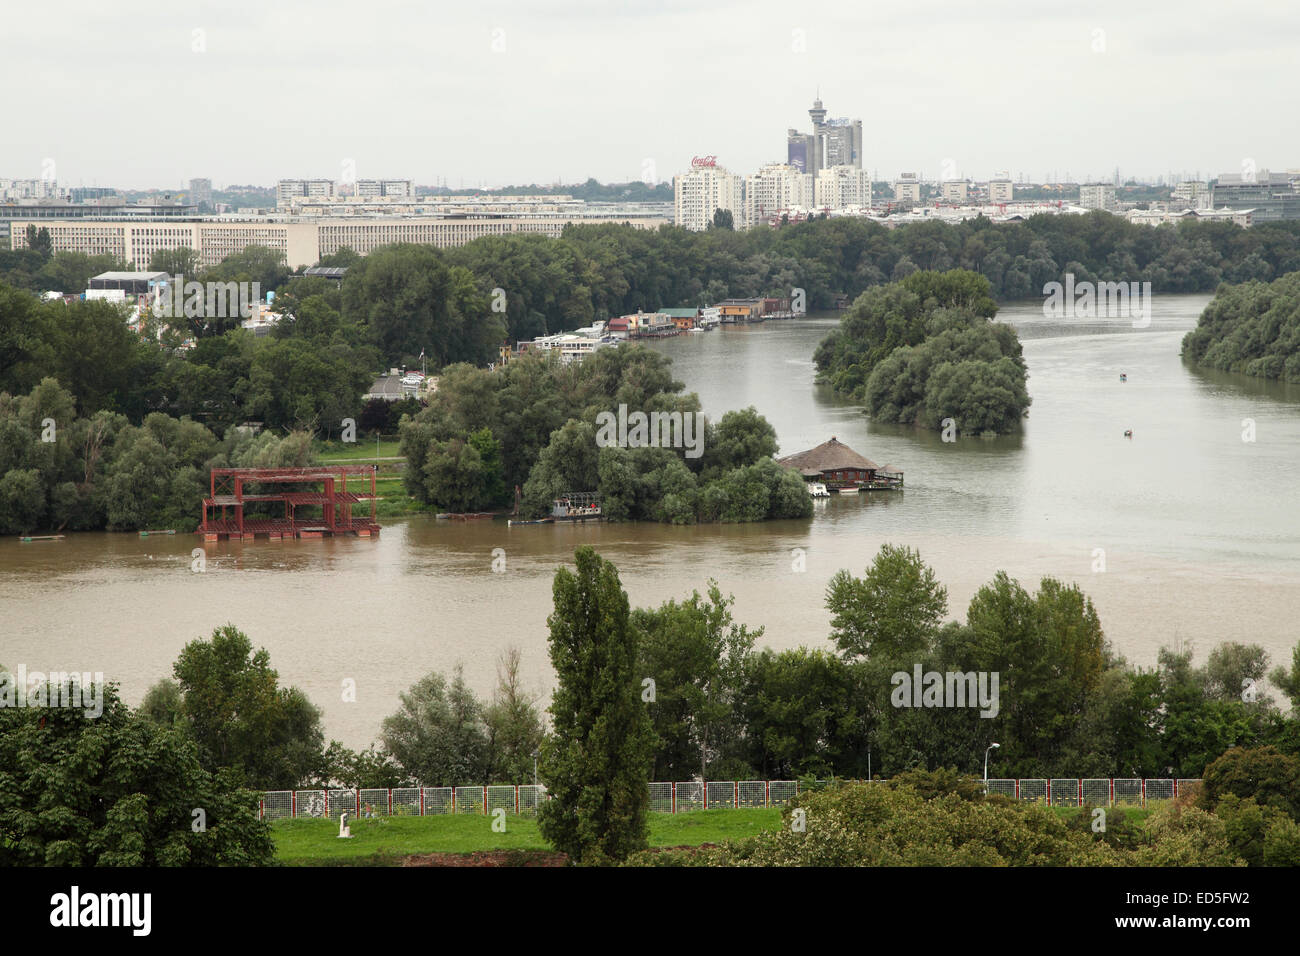 The confluence of the Sava and Danube rivers in Belgrade, Serbia. The rivers play a significant role in the life of Belgrade. Stock Photo